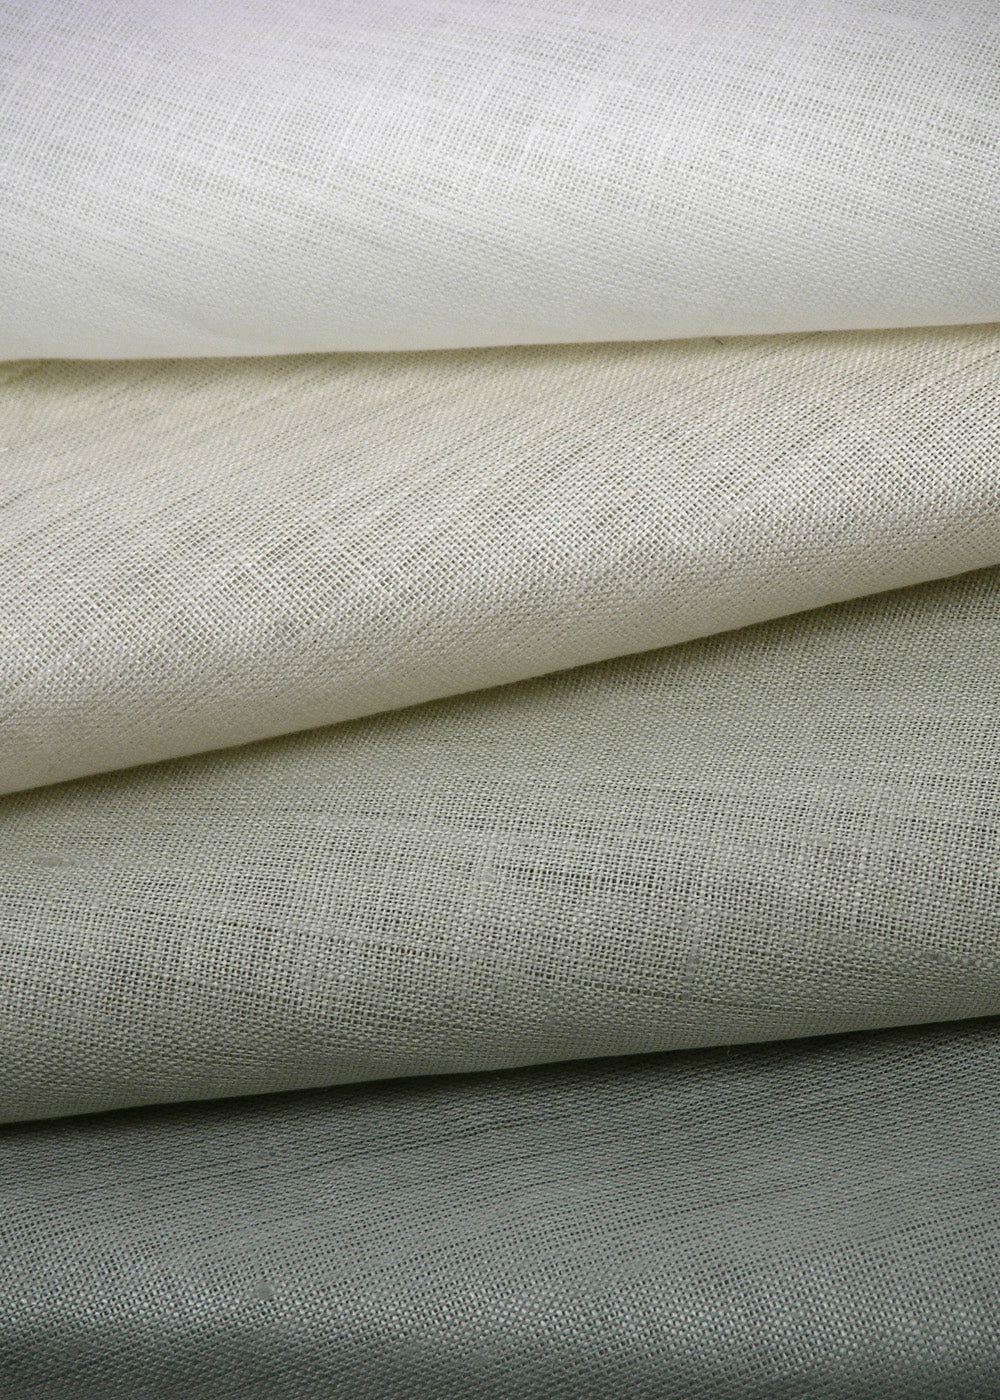 stack of sheer fabric with a luminous finish